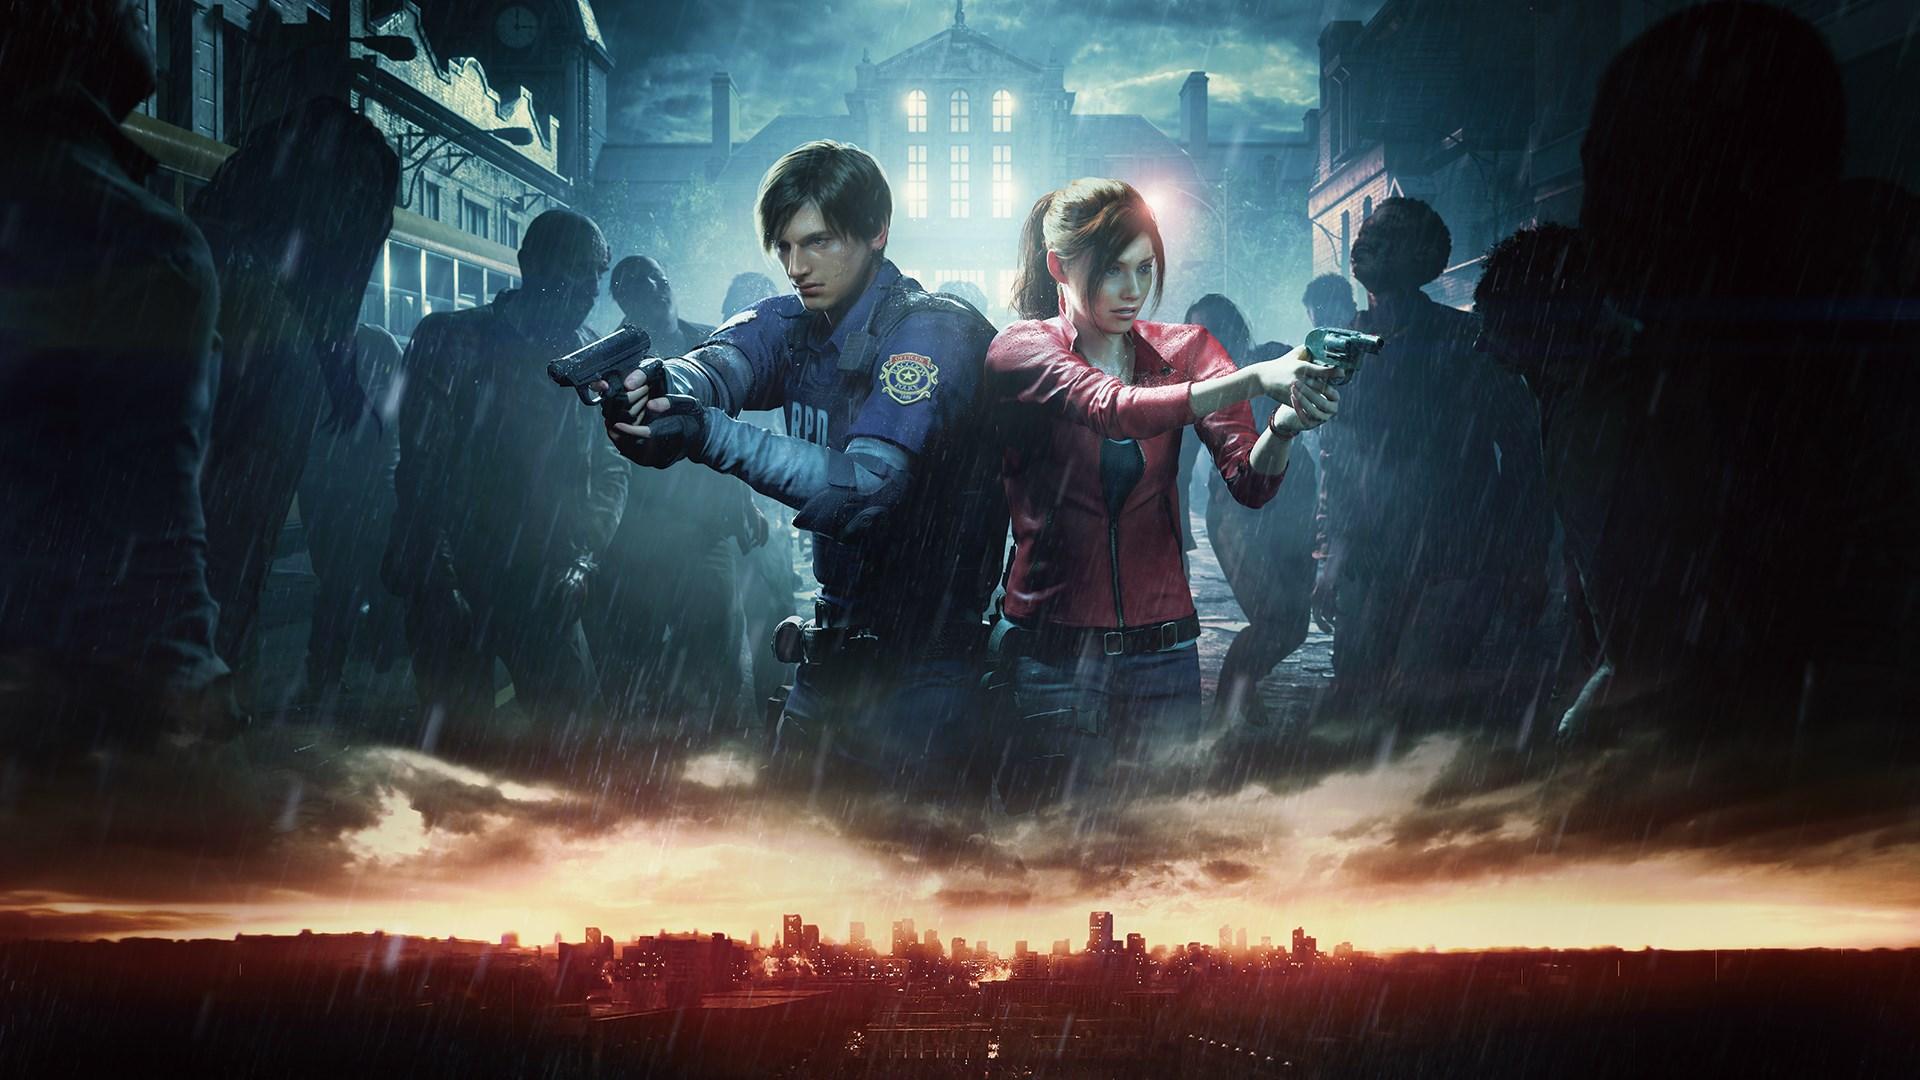 Resident Evil 2 Remake sells over 5 million copies – outperforming